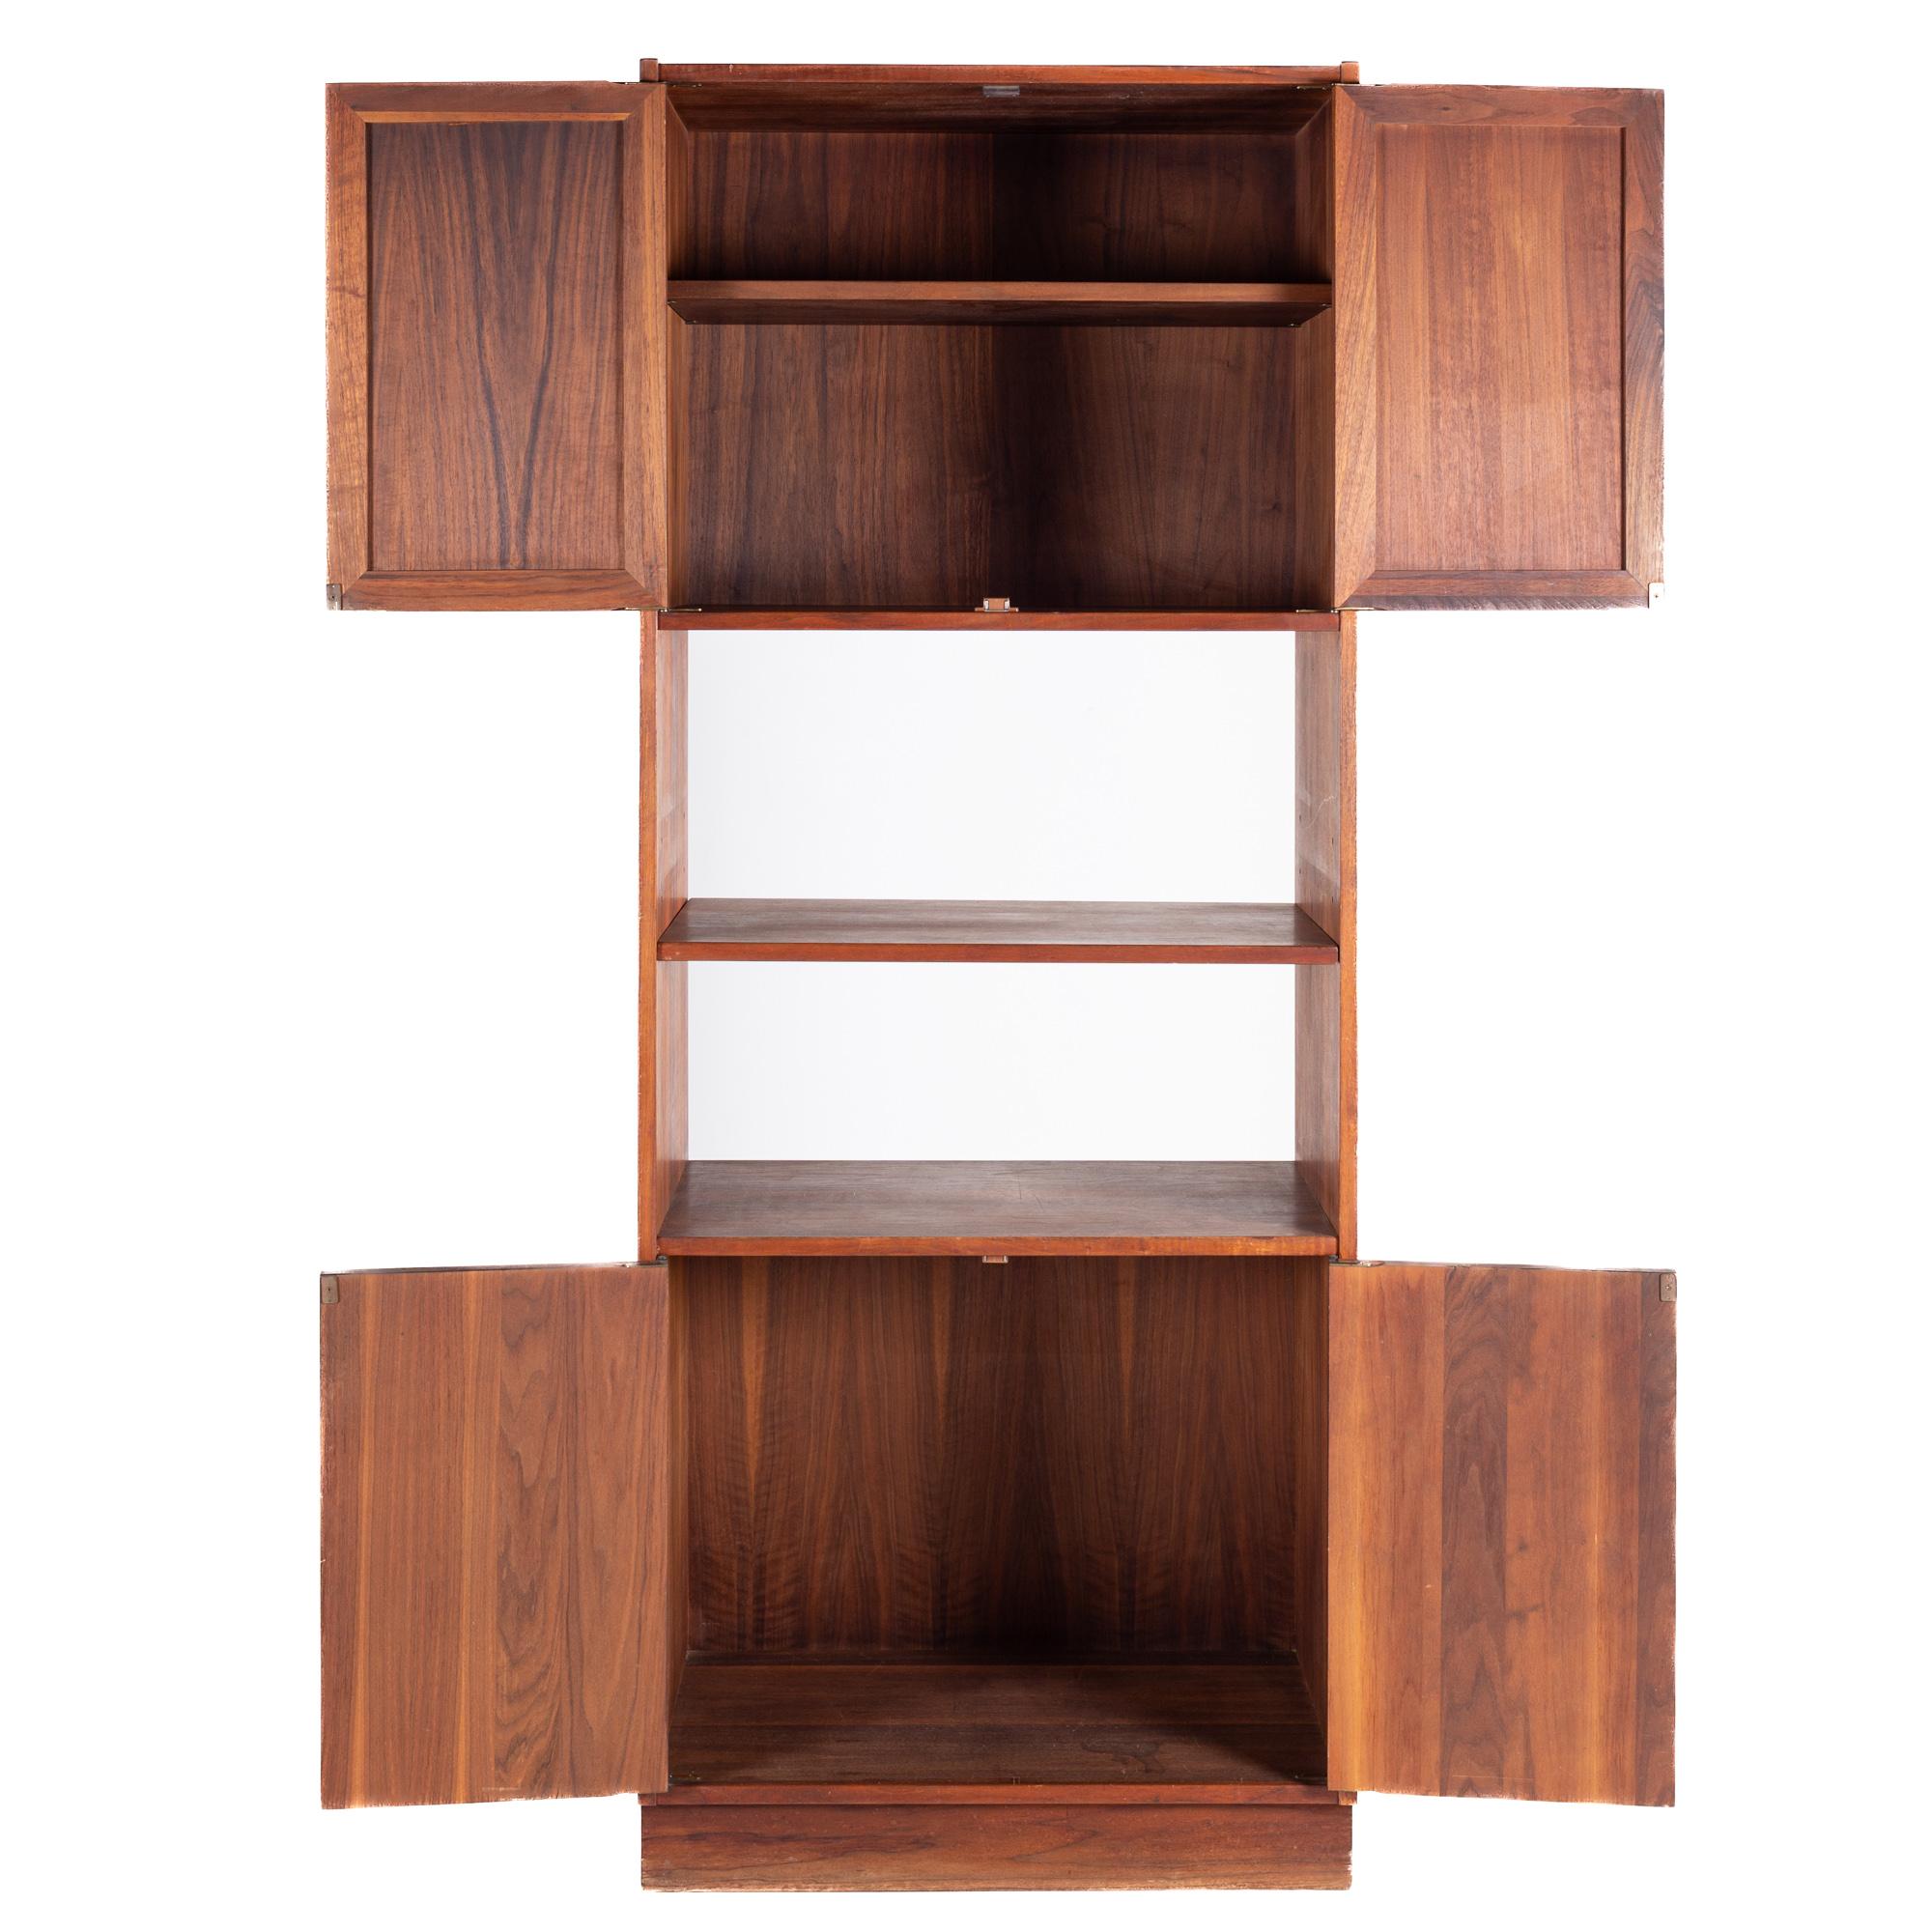 Late 20th Century Founders Style Mid Century Walnut and Cane Display Shelf For Sale